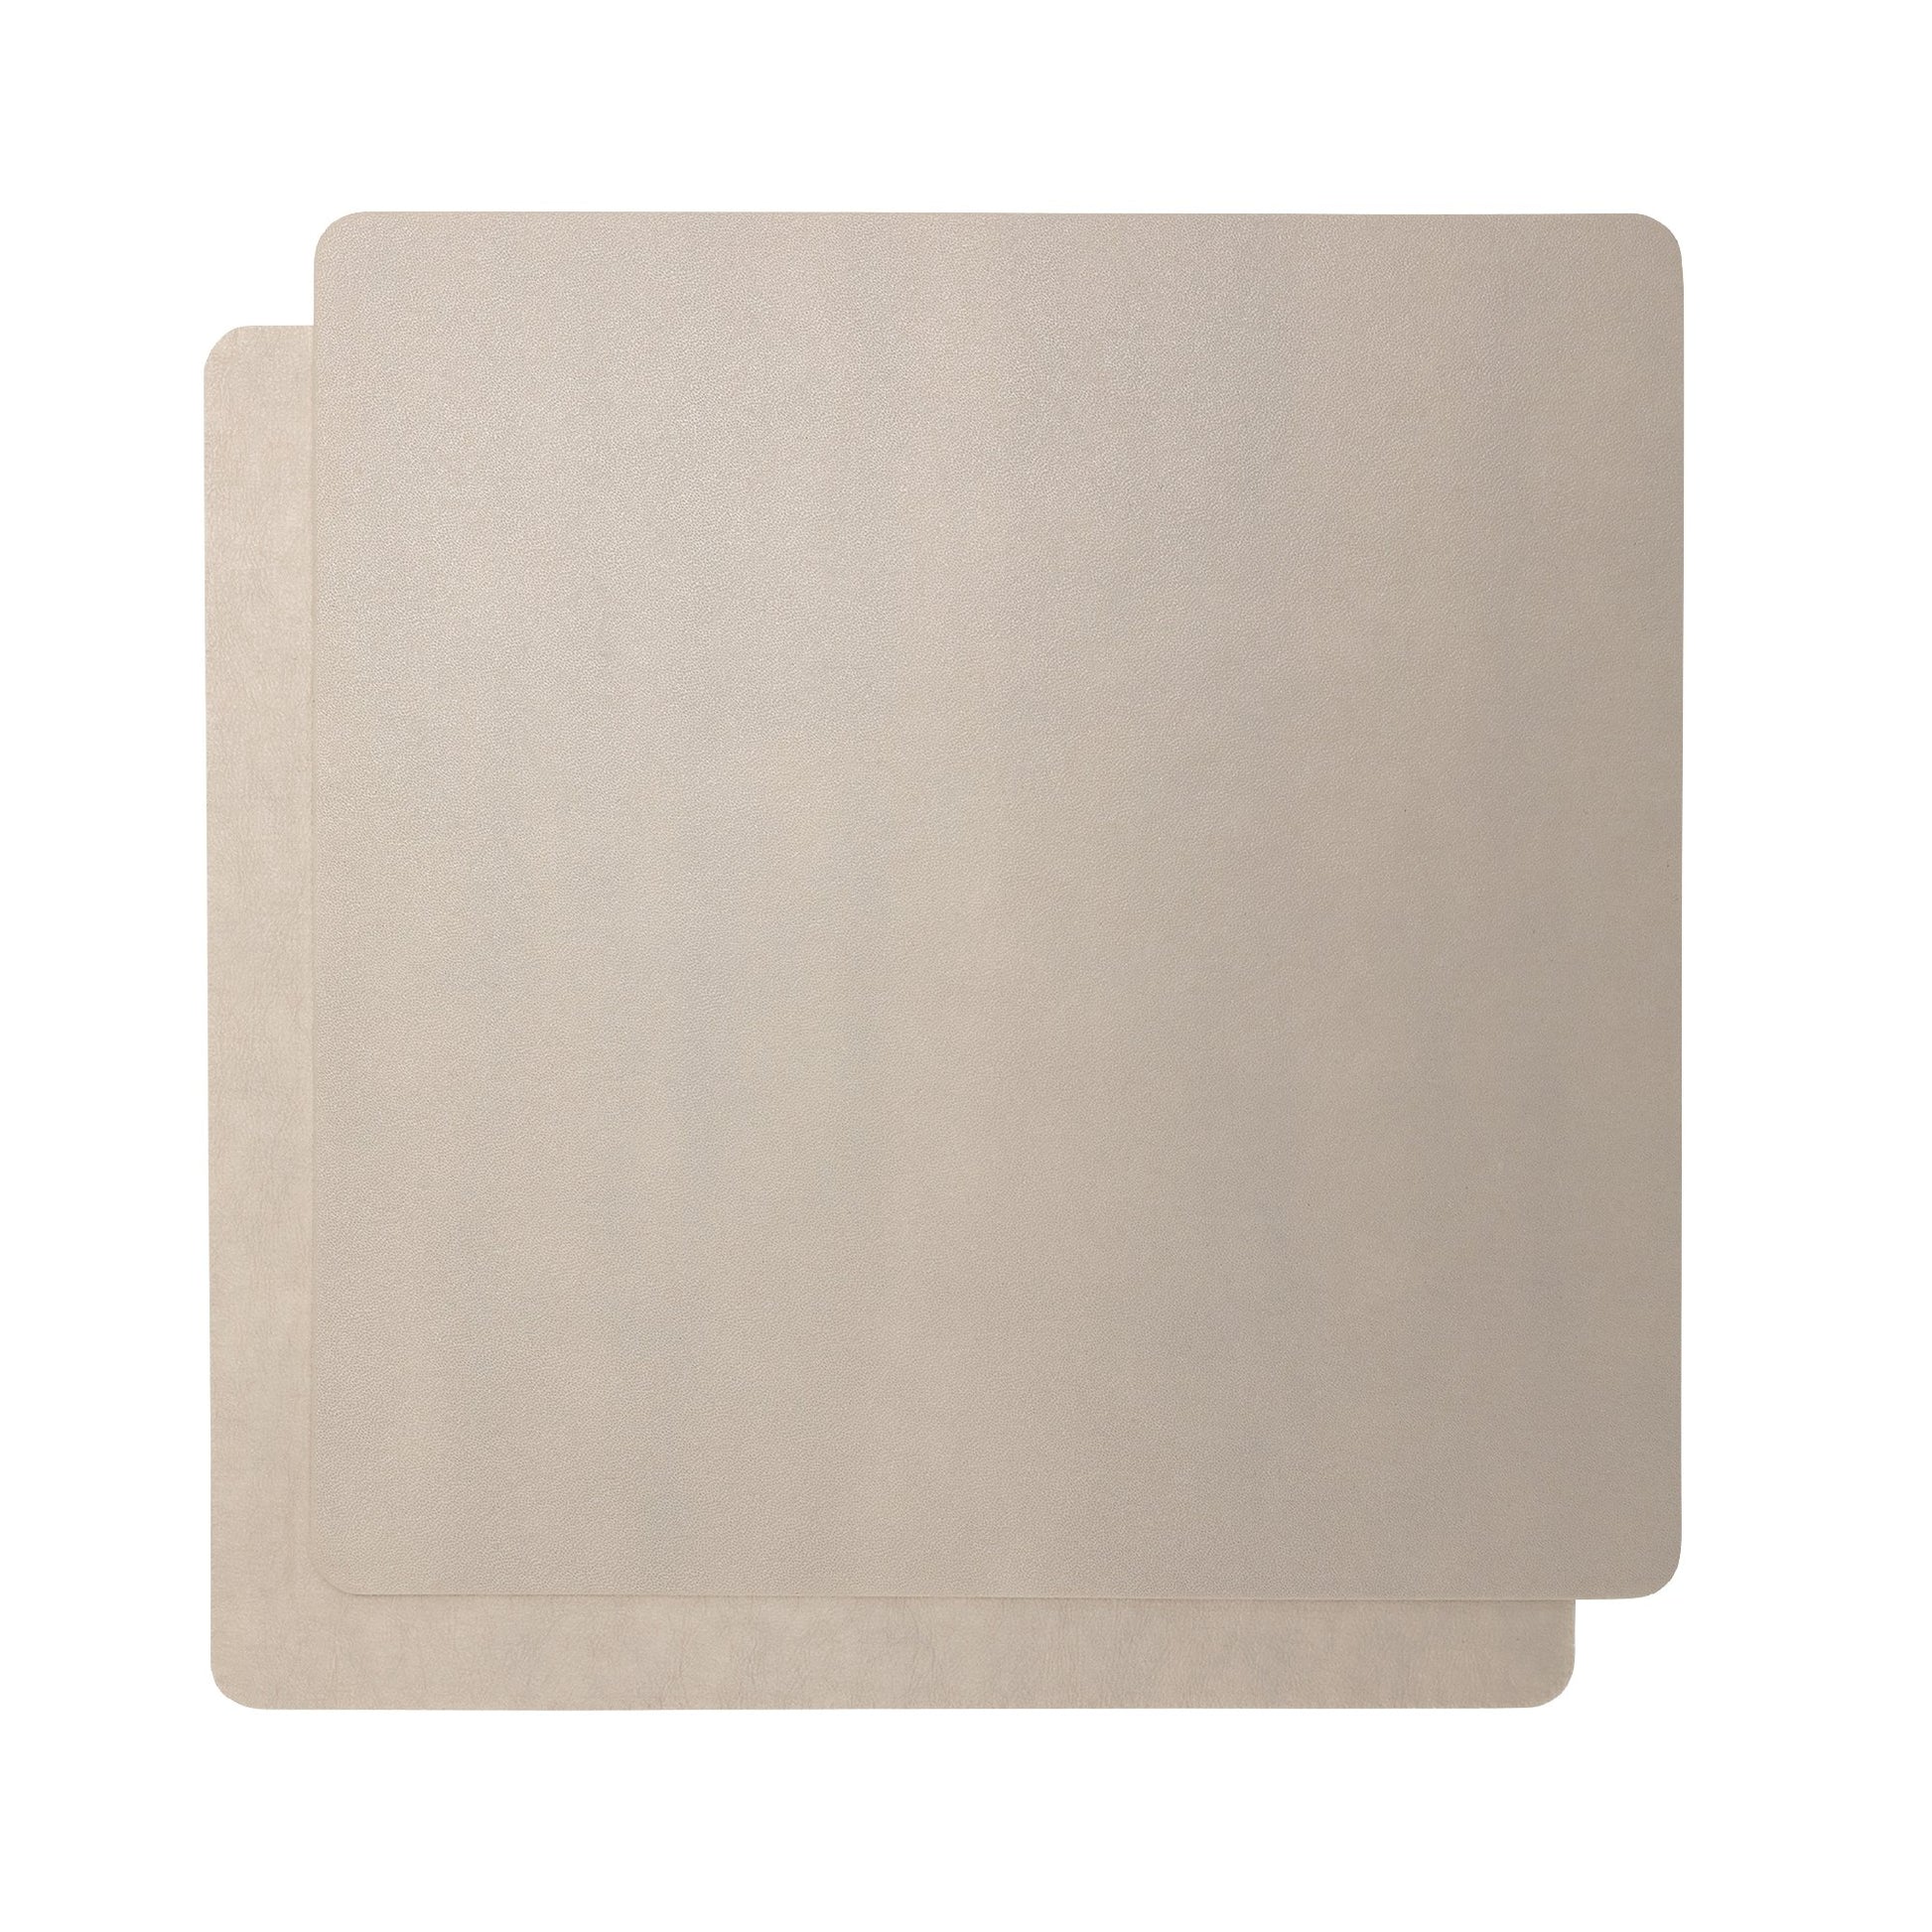 Two beige square washable paper placemats are shown one on top of the other. 